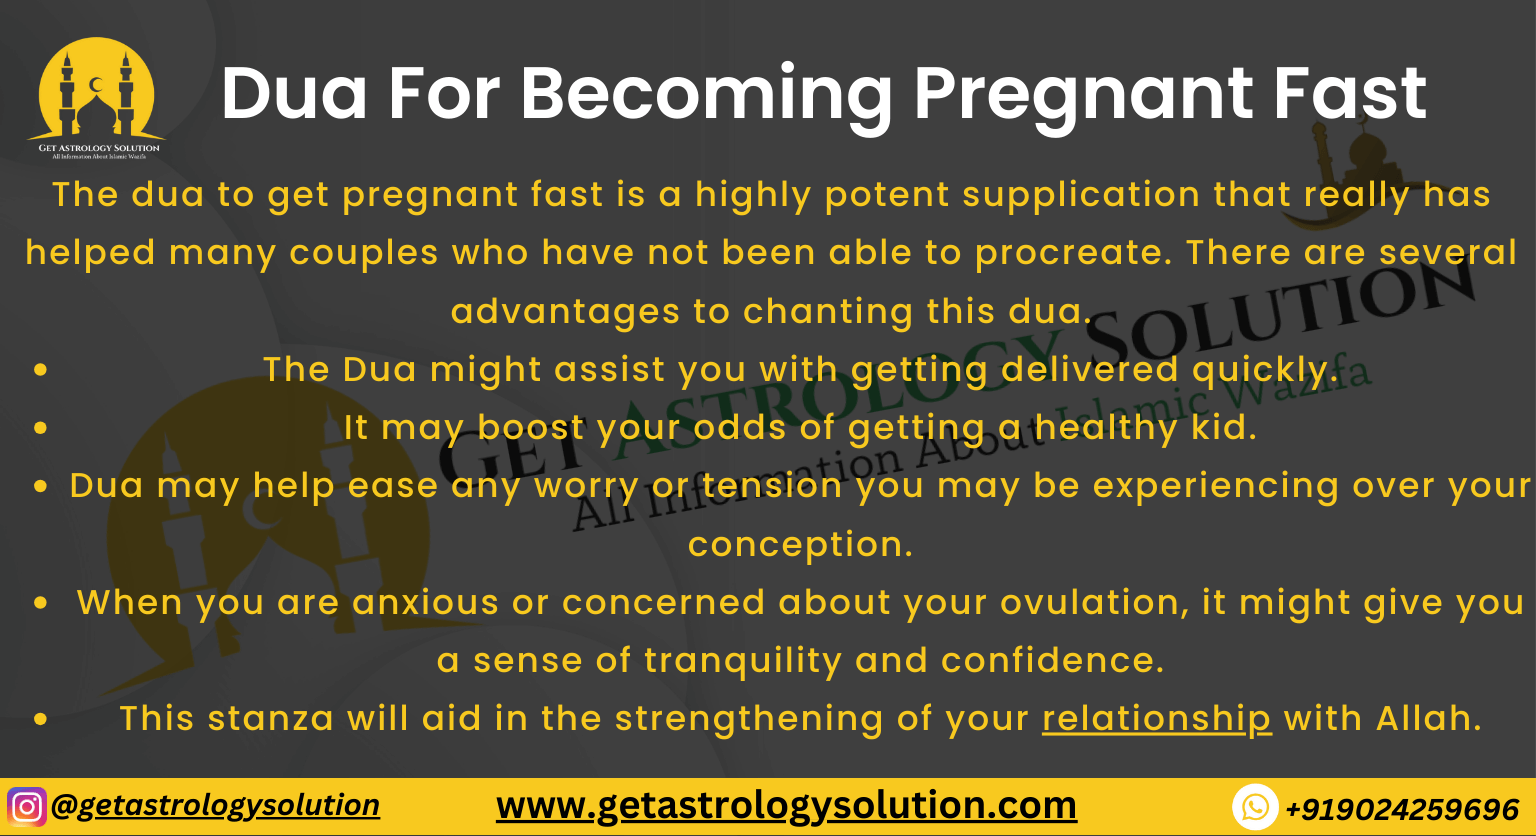 Dua For Becoming Pregnant Fast